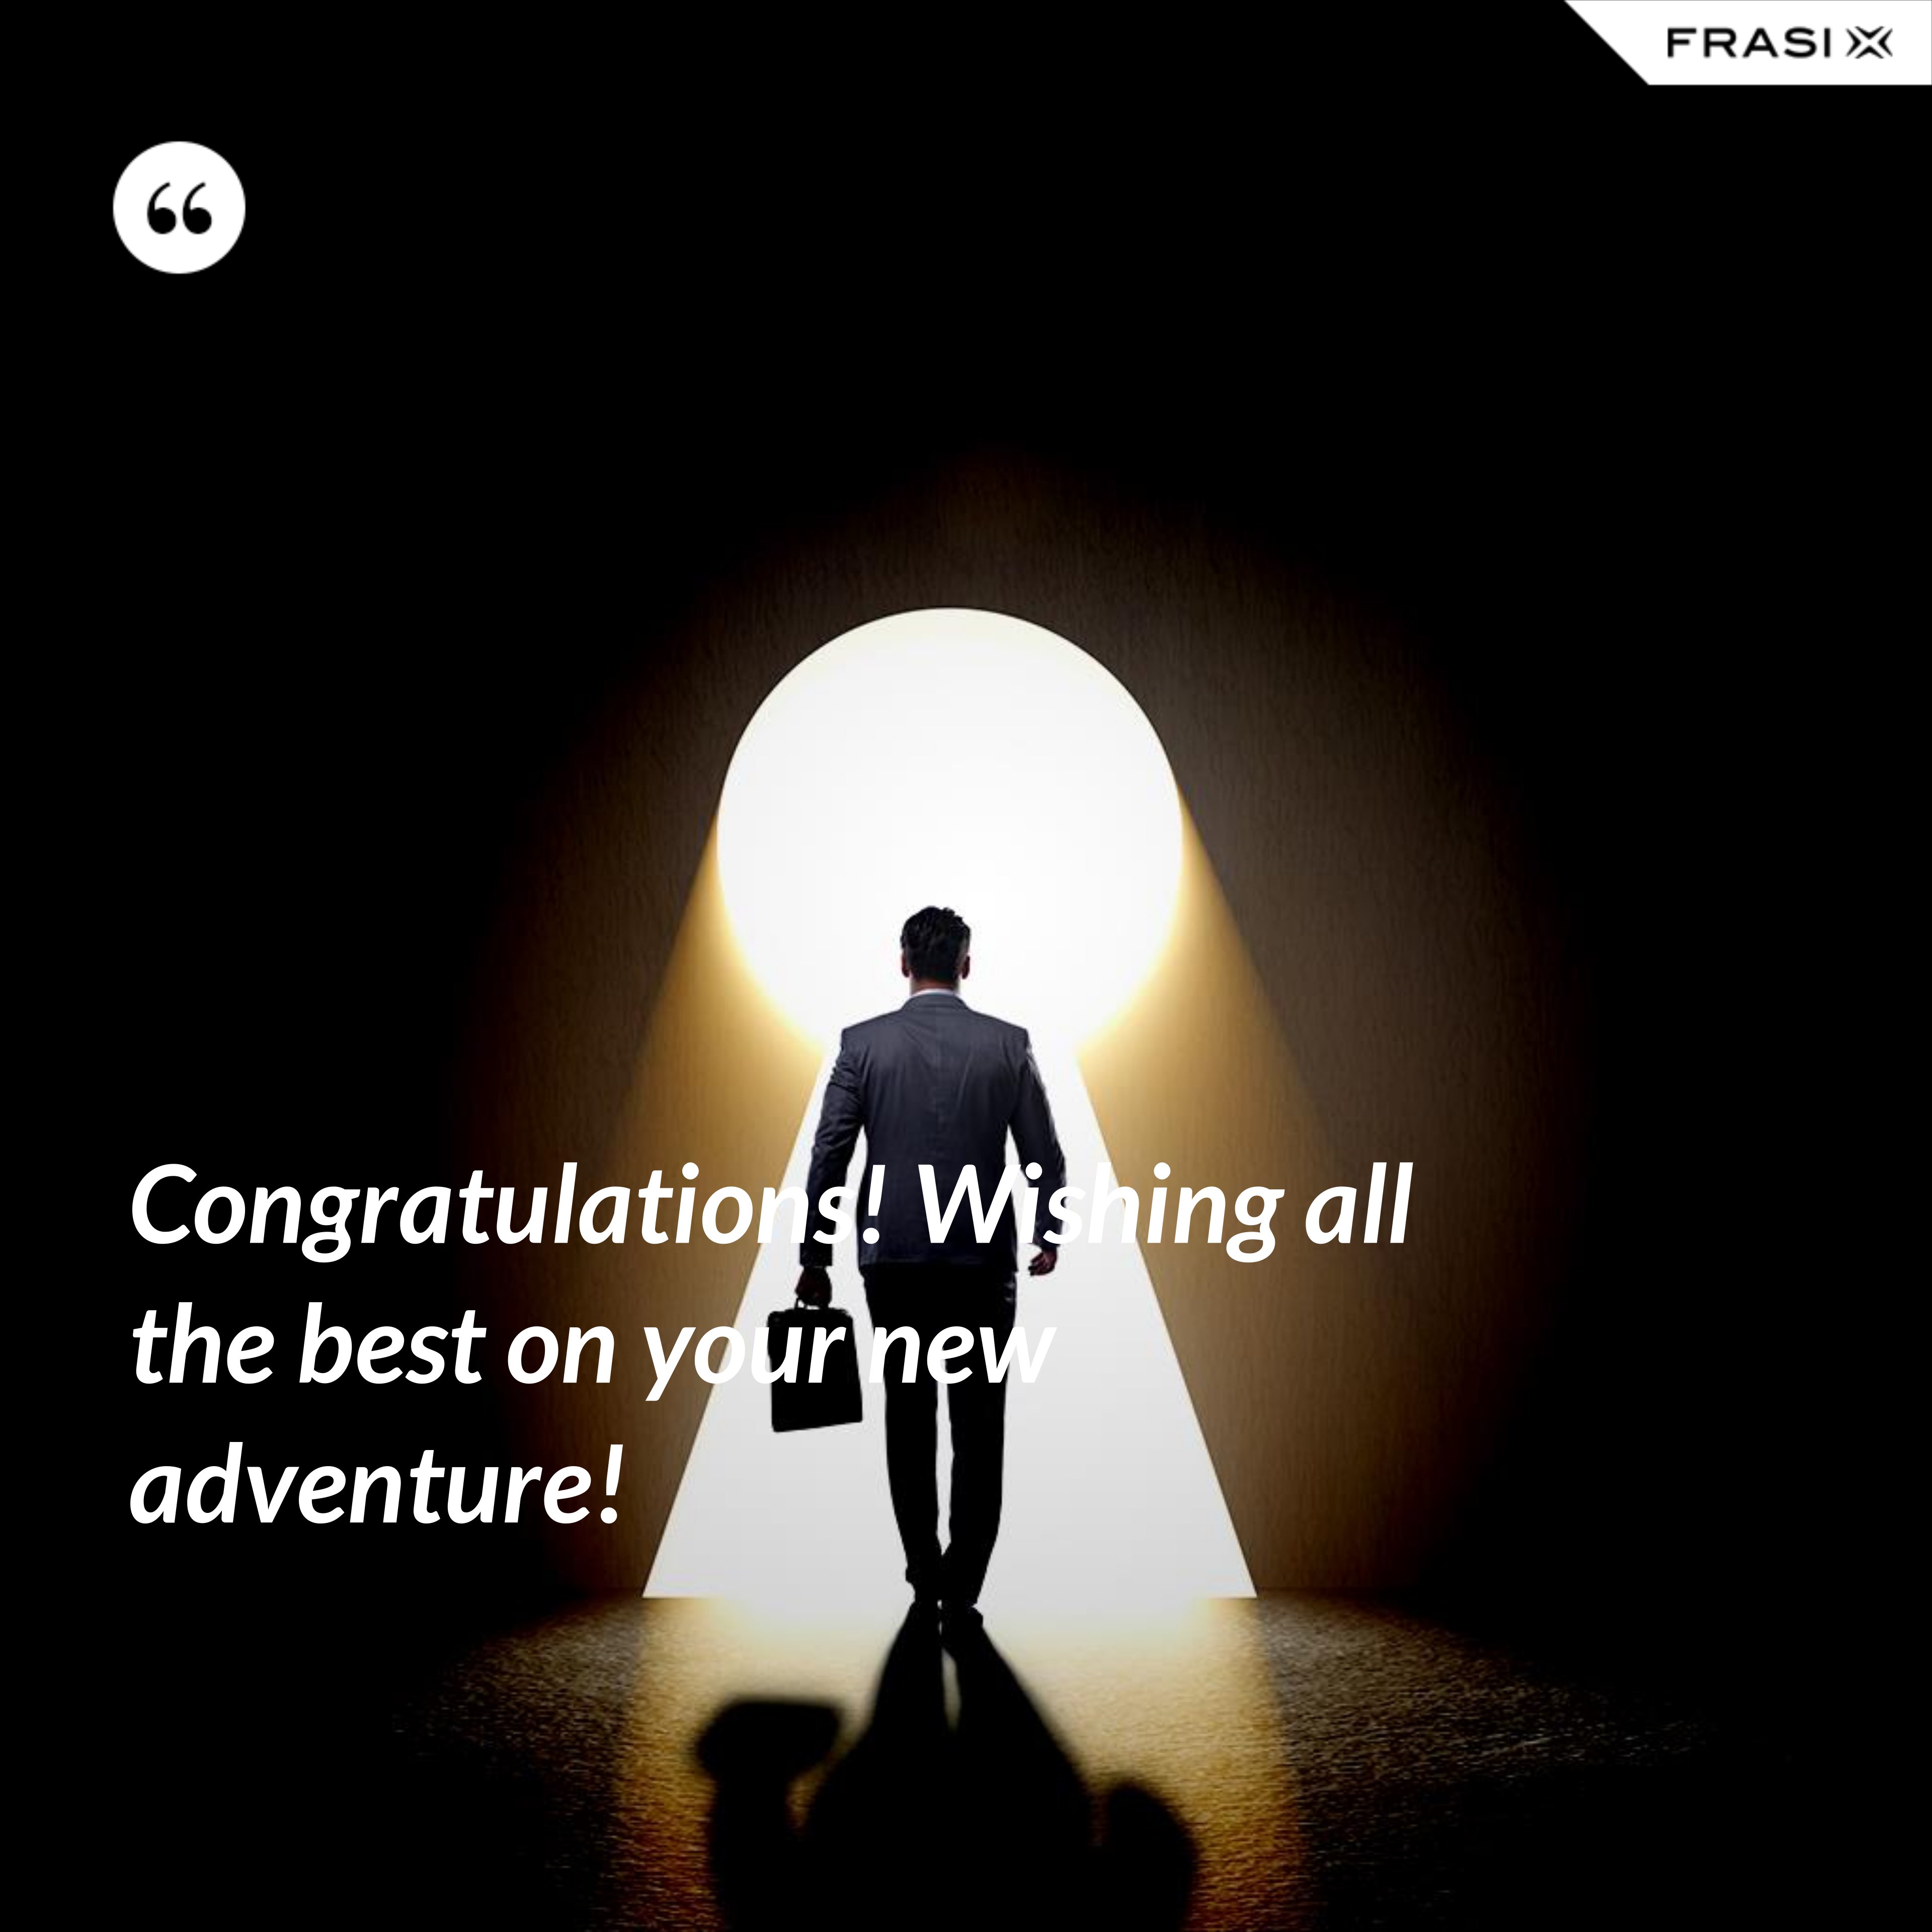 Congratulations! Wishing all the best on your new adventure! - Anonimo